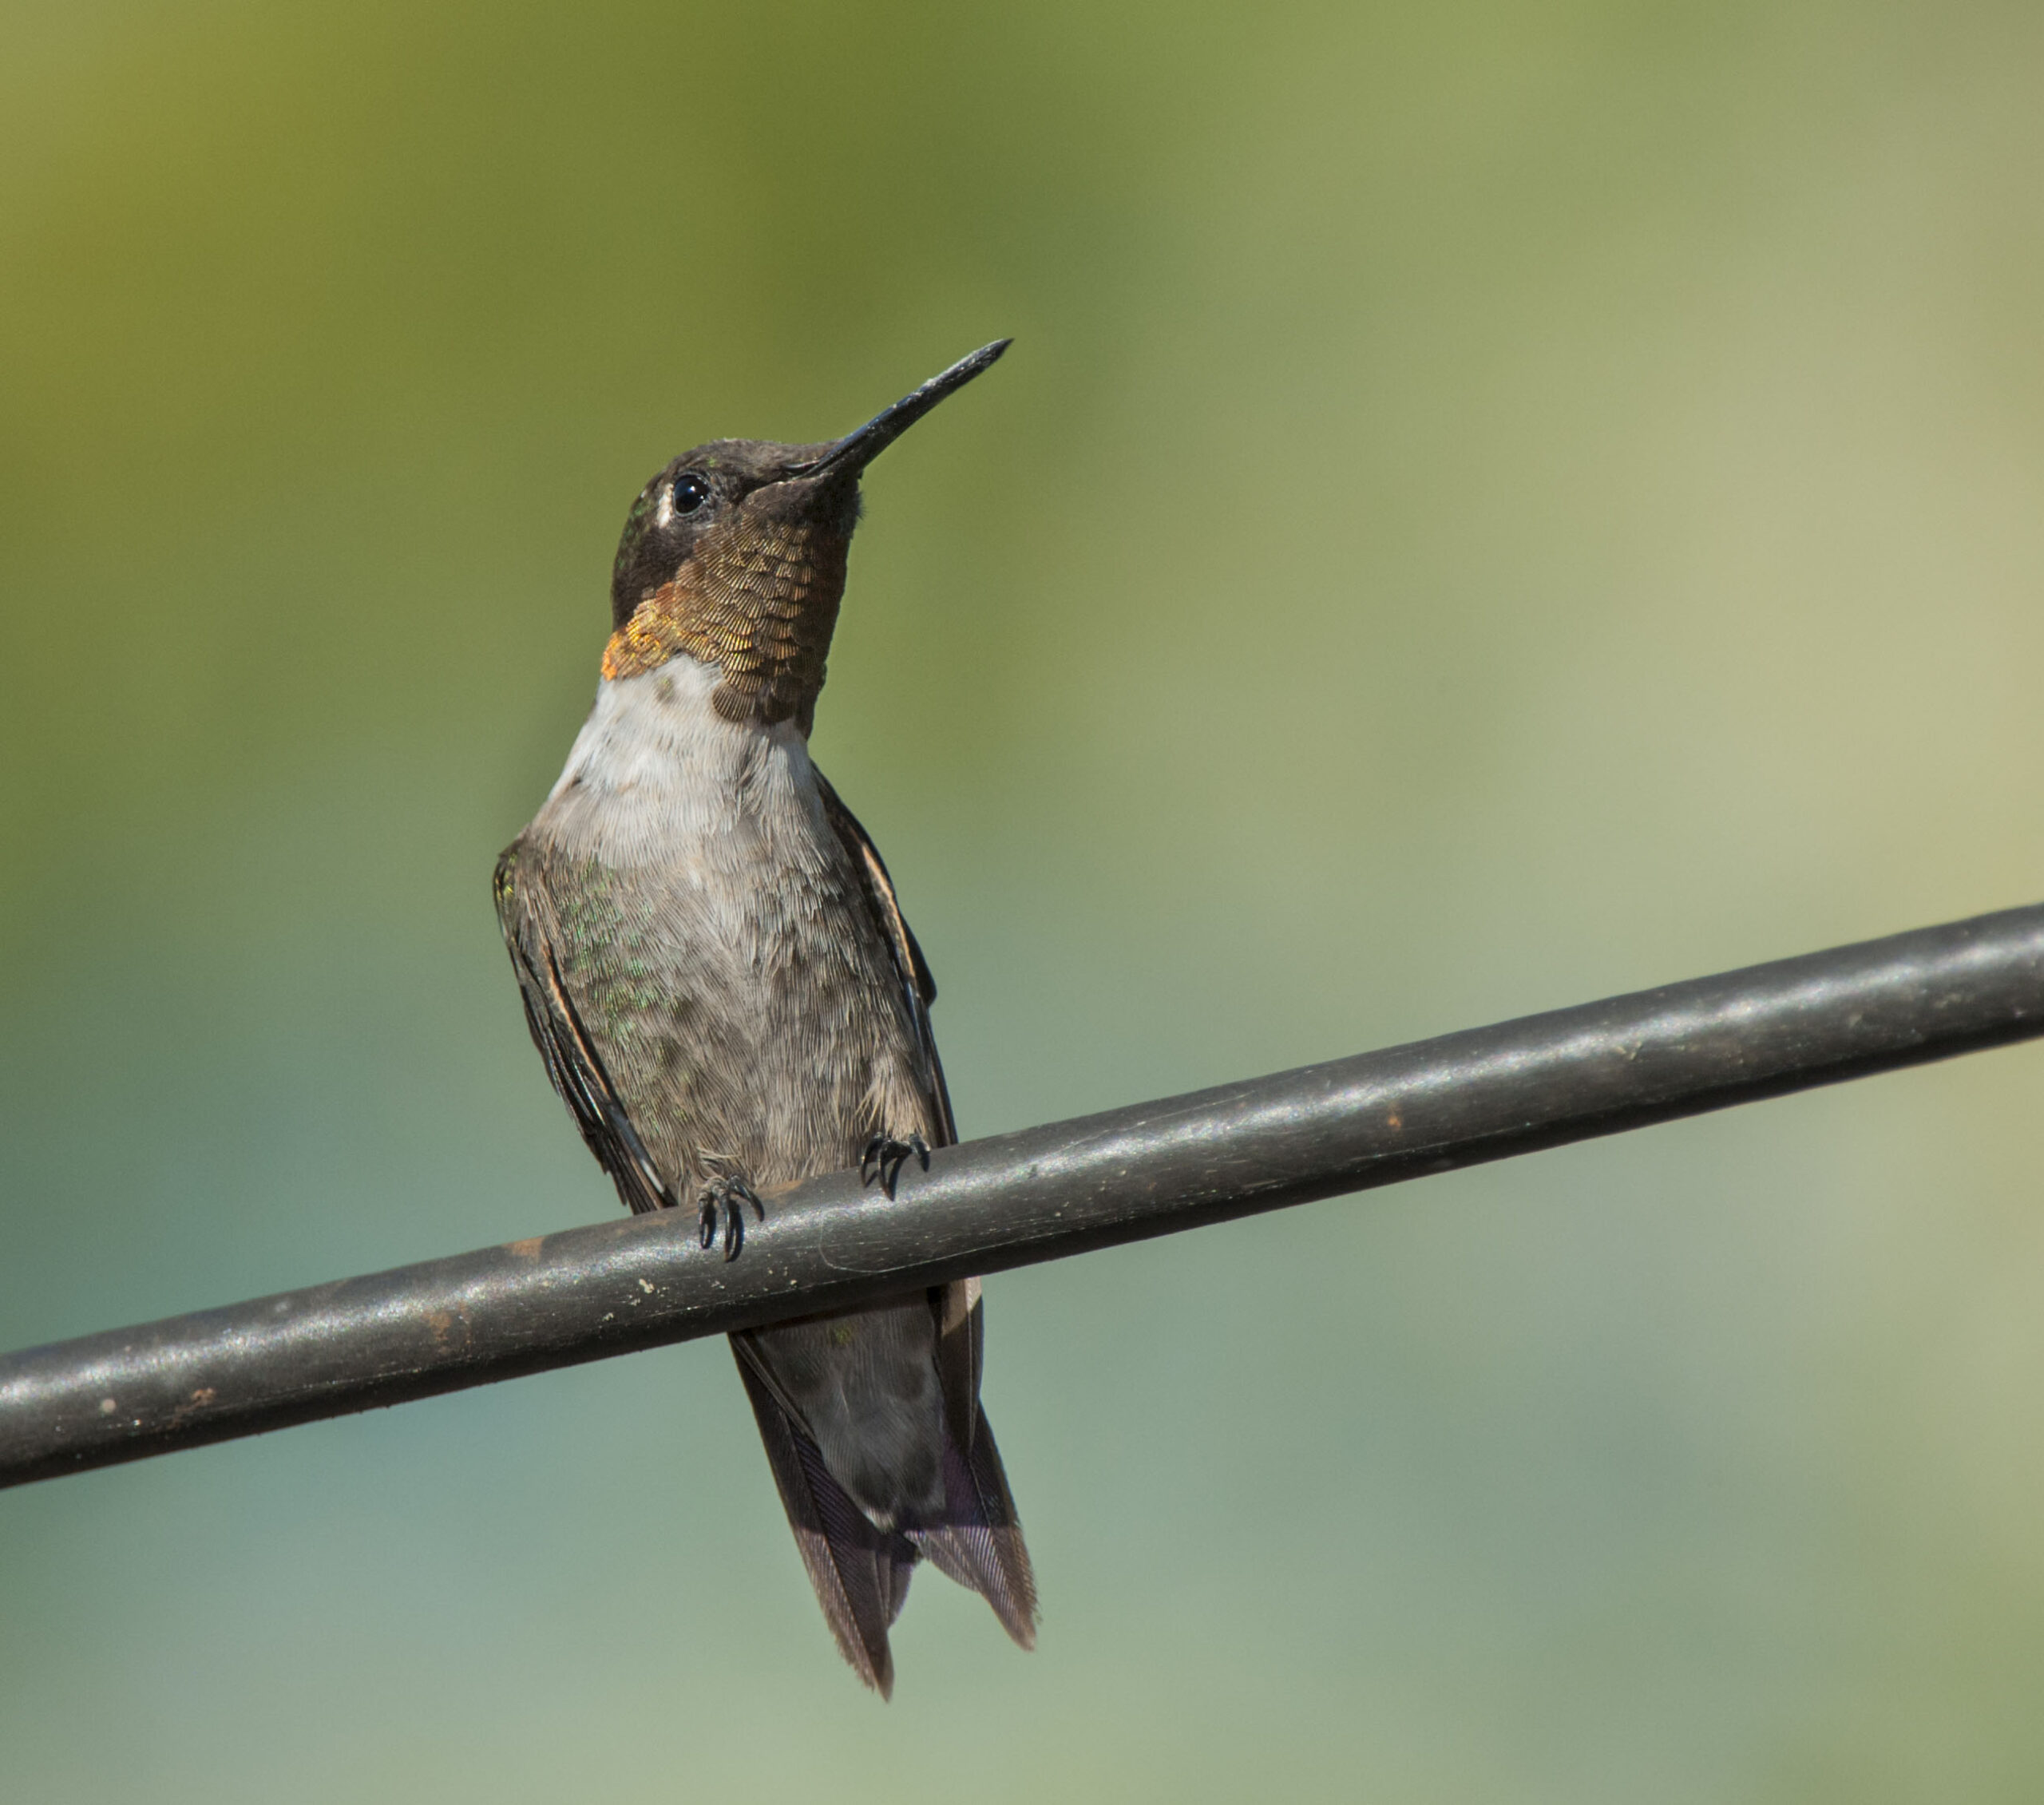 Ruby Throated Hummingbird | Indiana Dunes | Chicago Photography